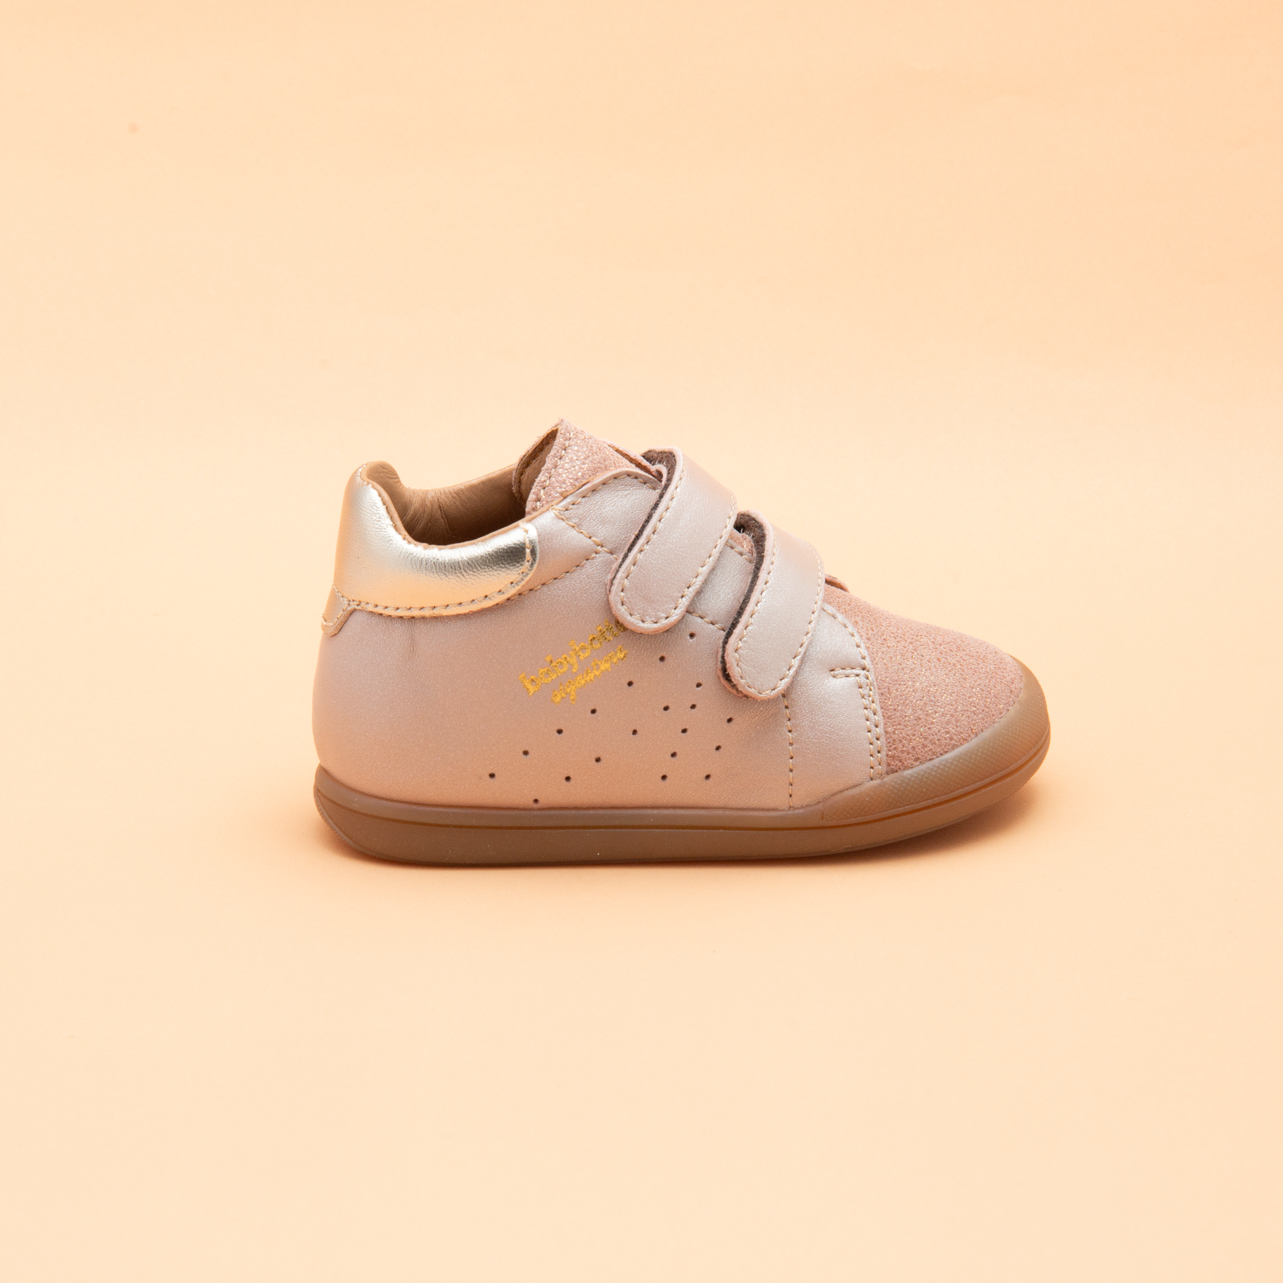 FASTY VELCRO-CUIR ROSE PALE